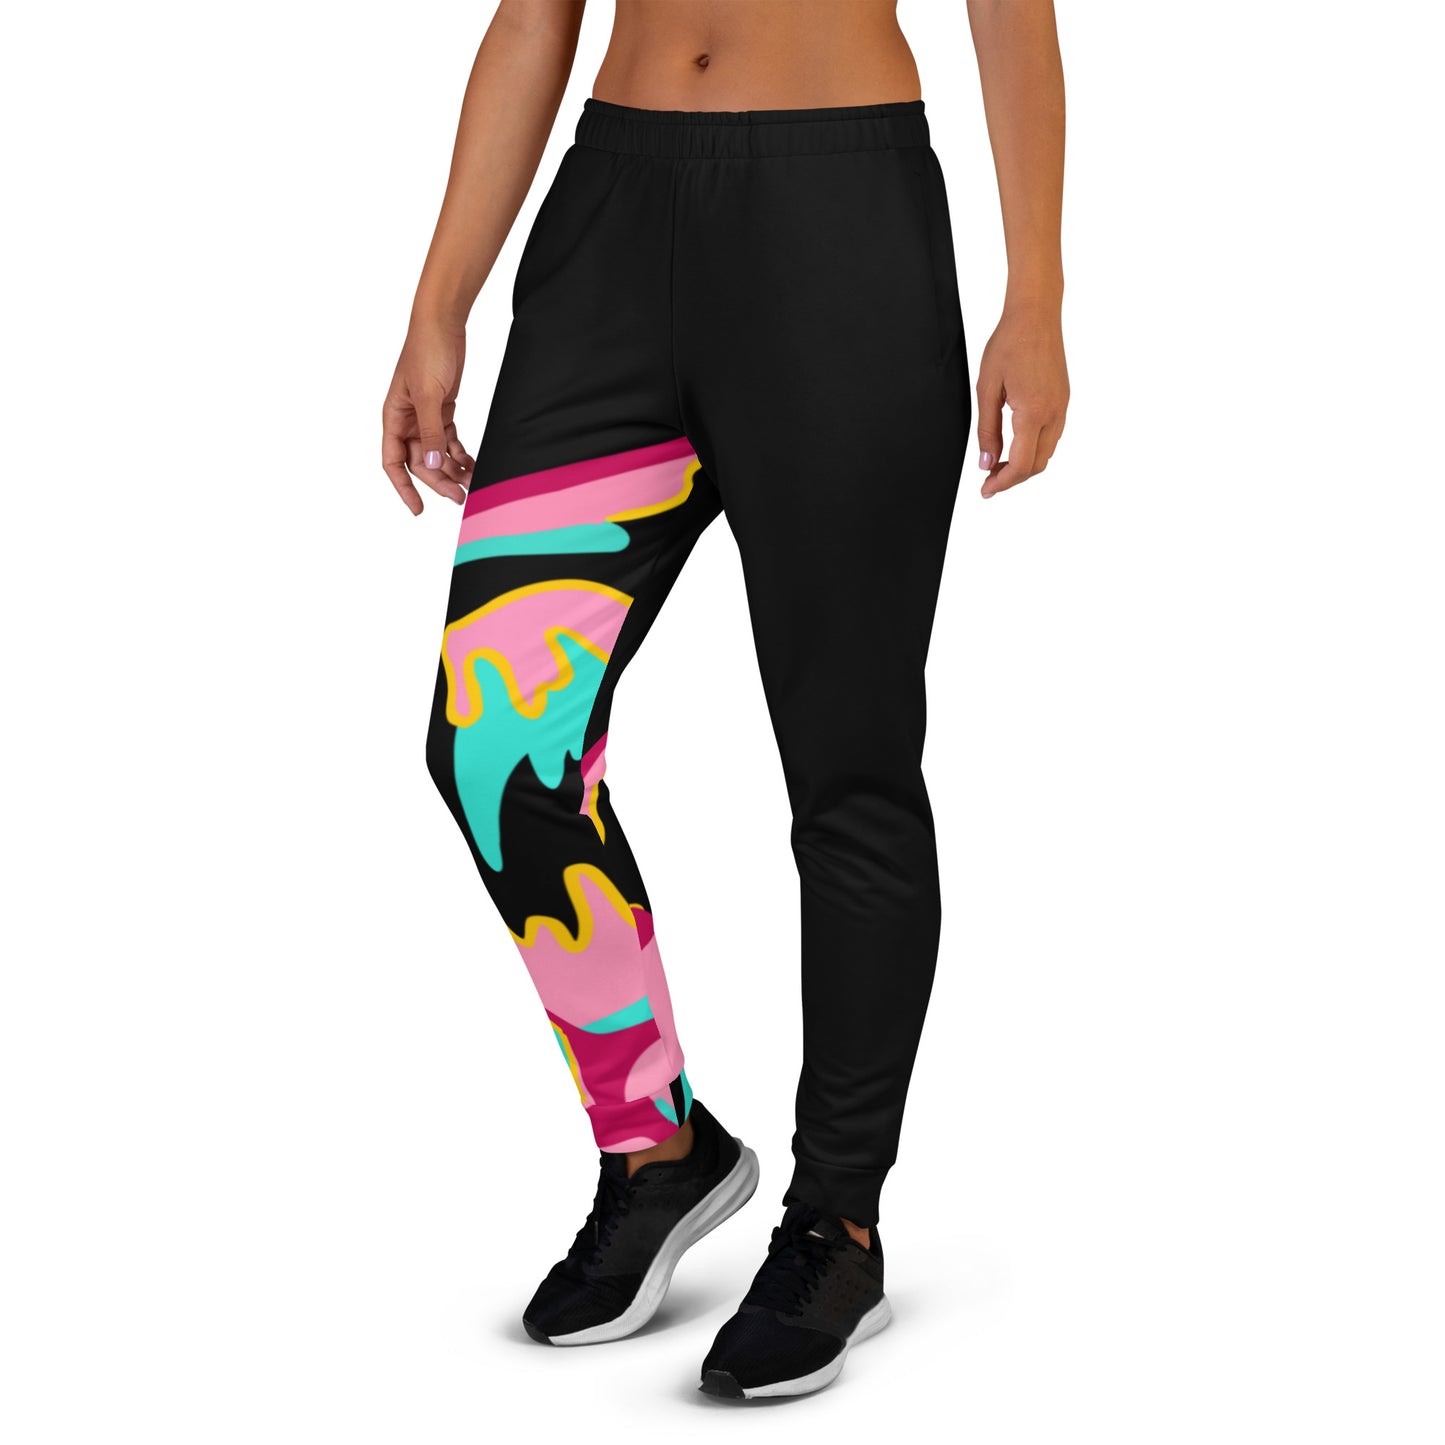 Body Love "New Classic" Joggers, fleece lined (Femme fit)